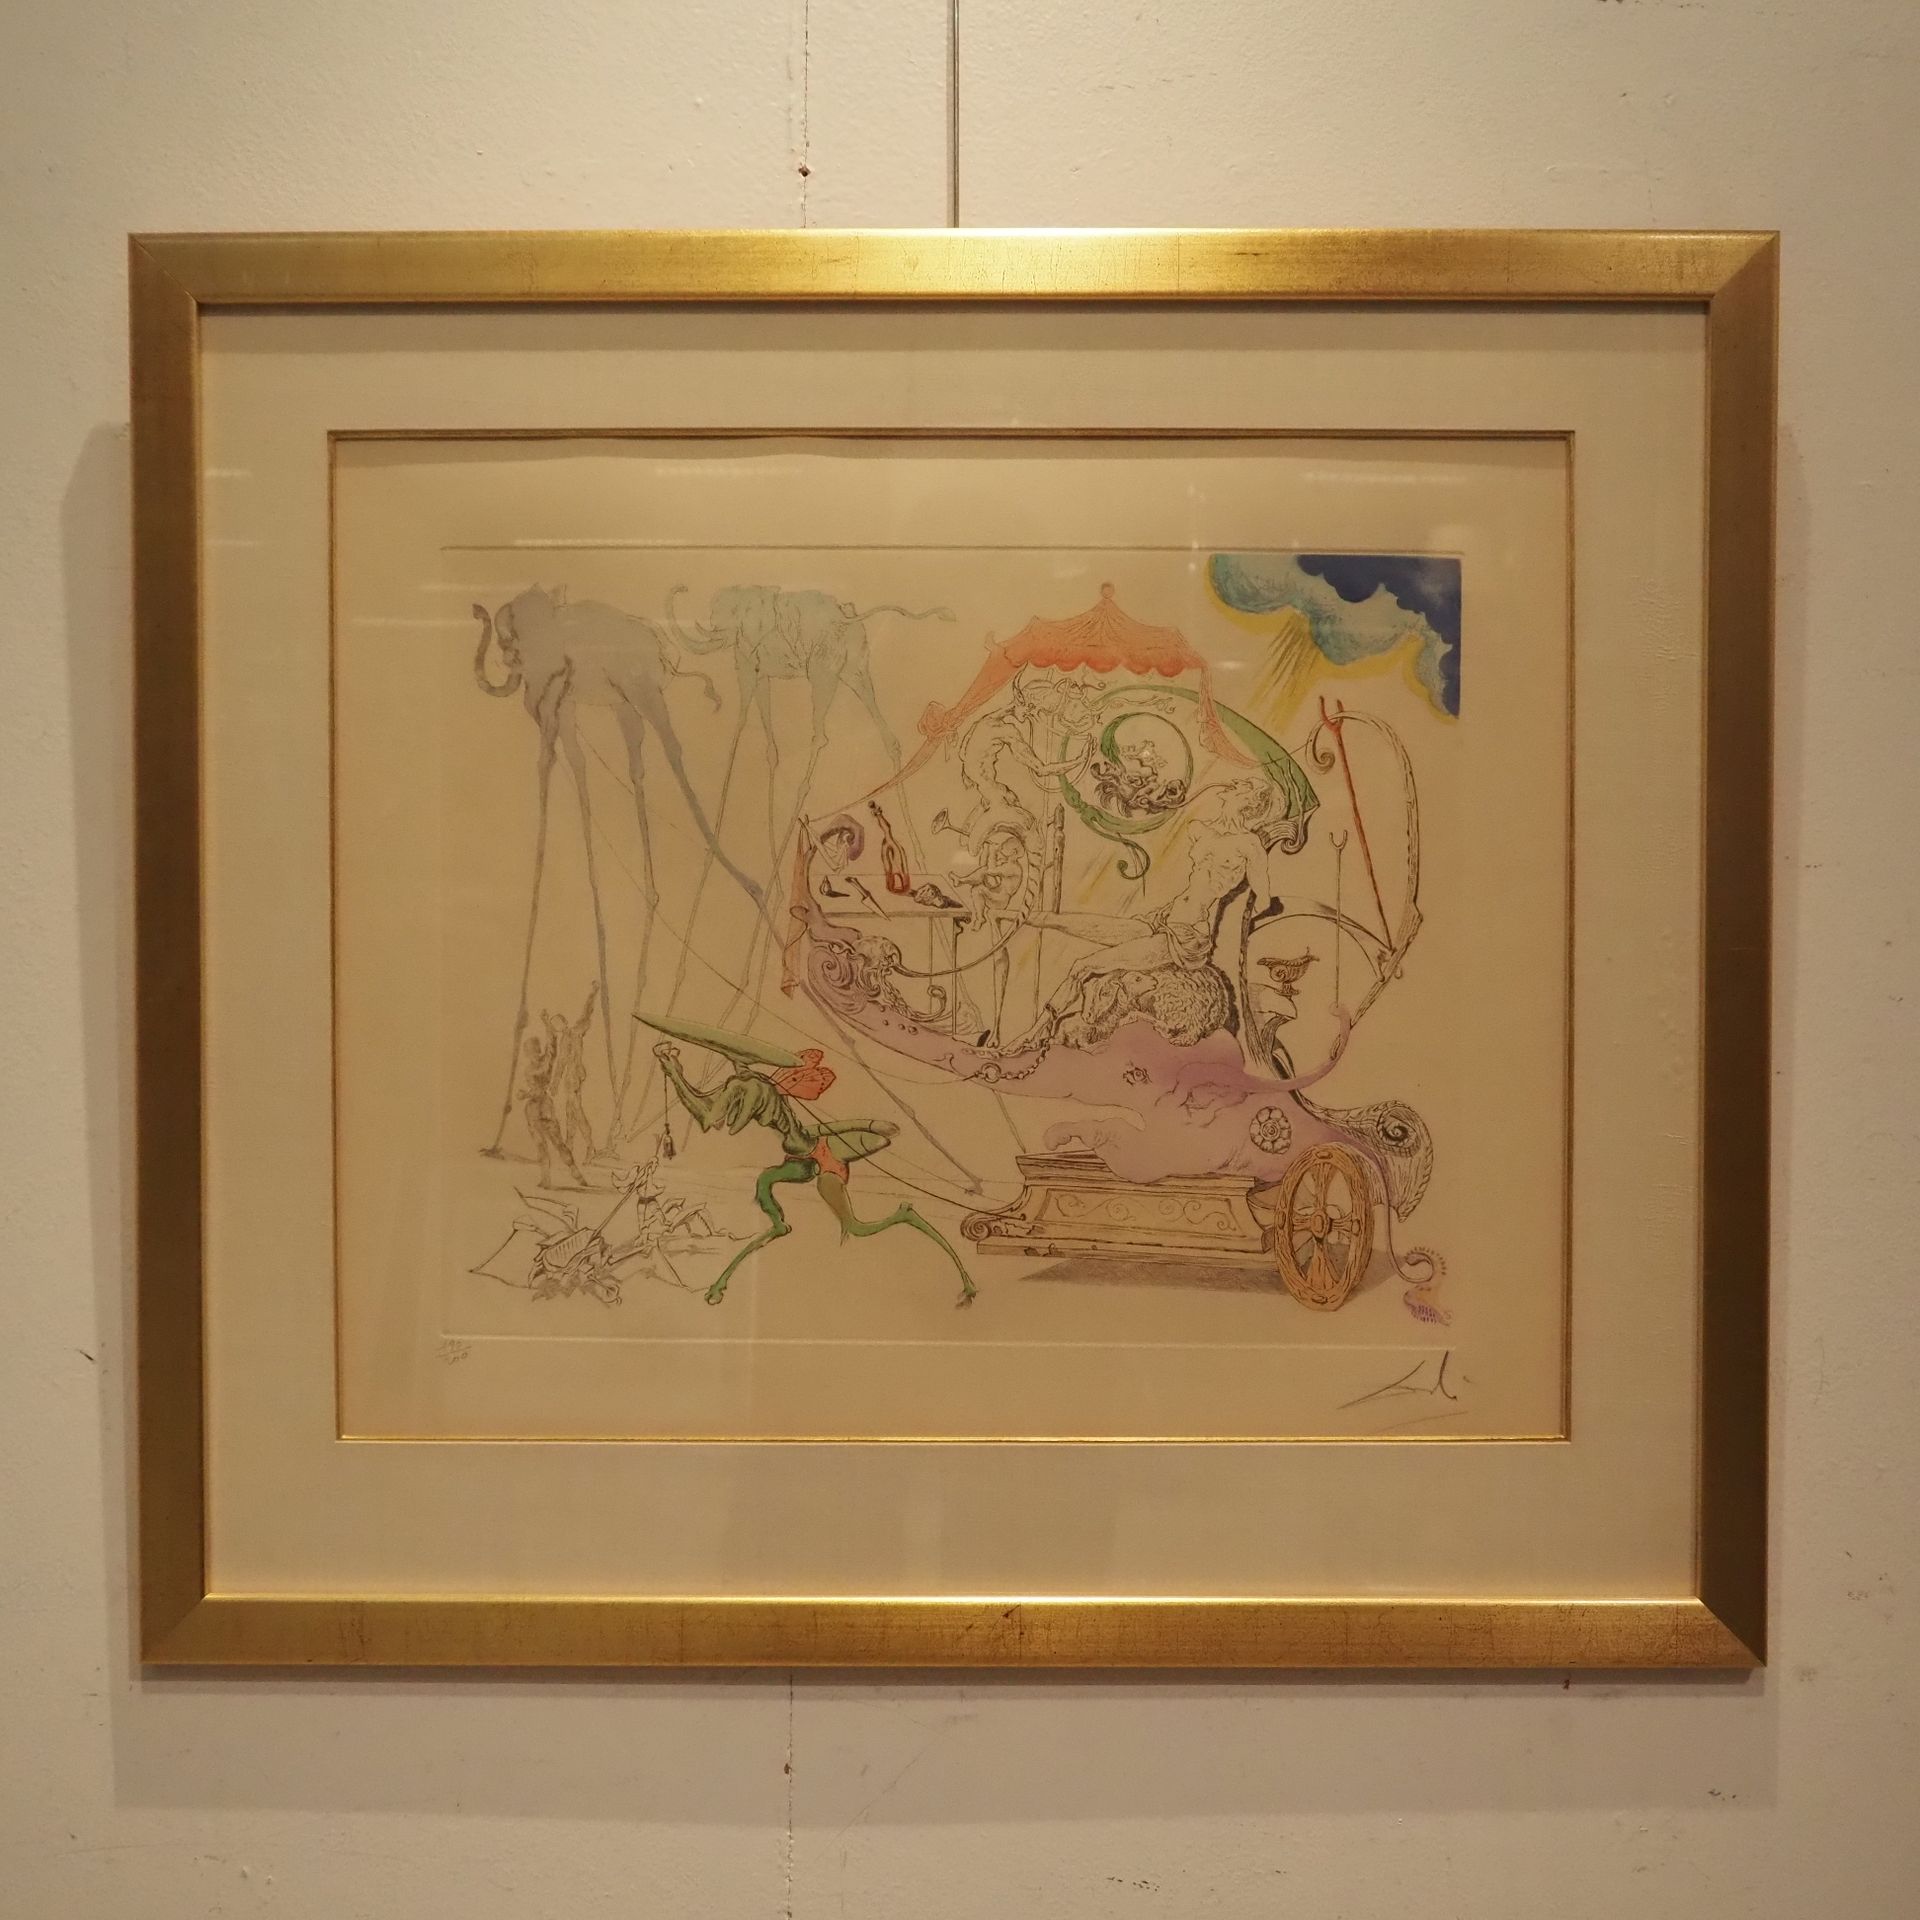 Null Dali Salvador (1904-1989): Color lithograph, signed in the lower right marg&hellip;